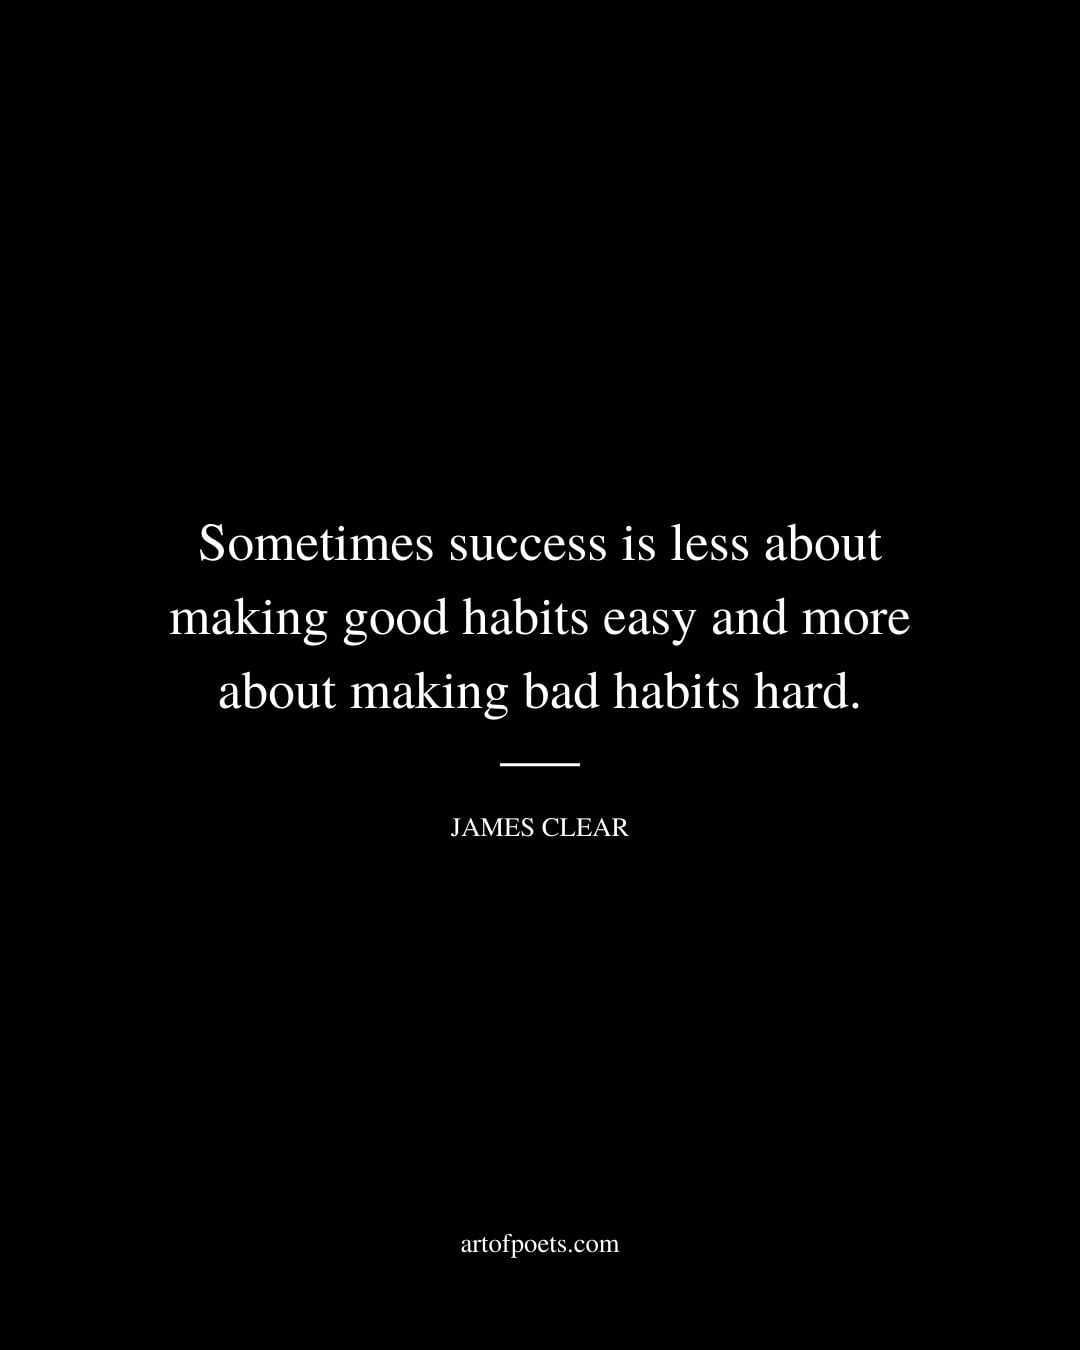 Sometimes success is less about making good habits easy and more about making bad habits hard